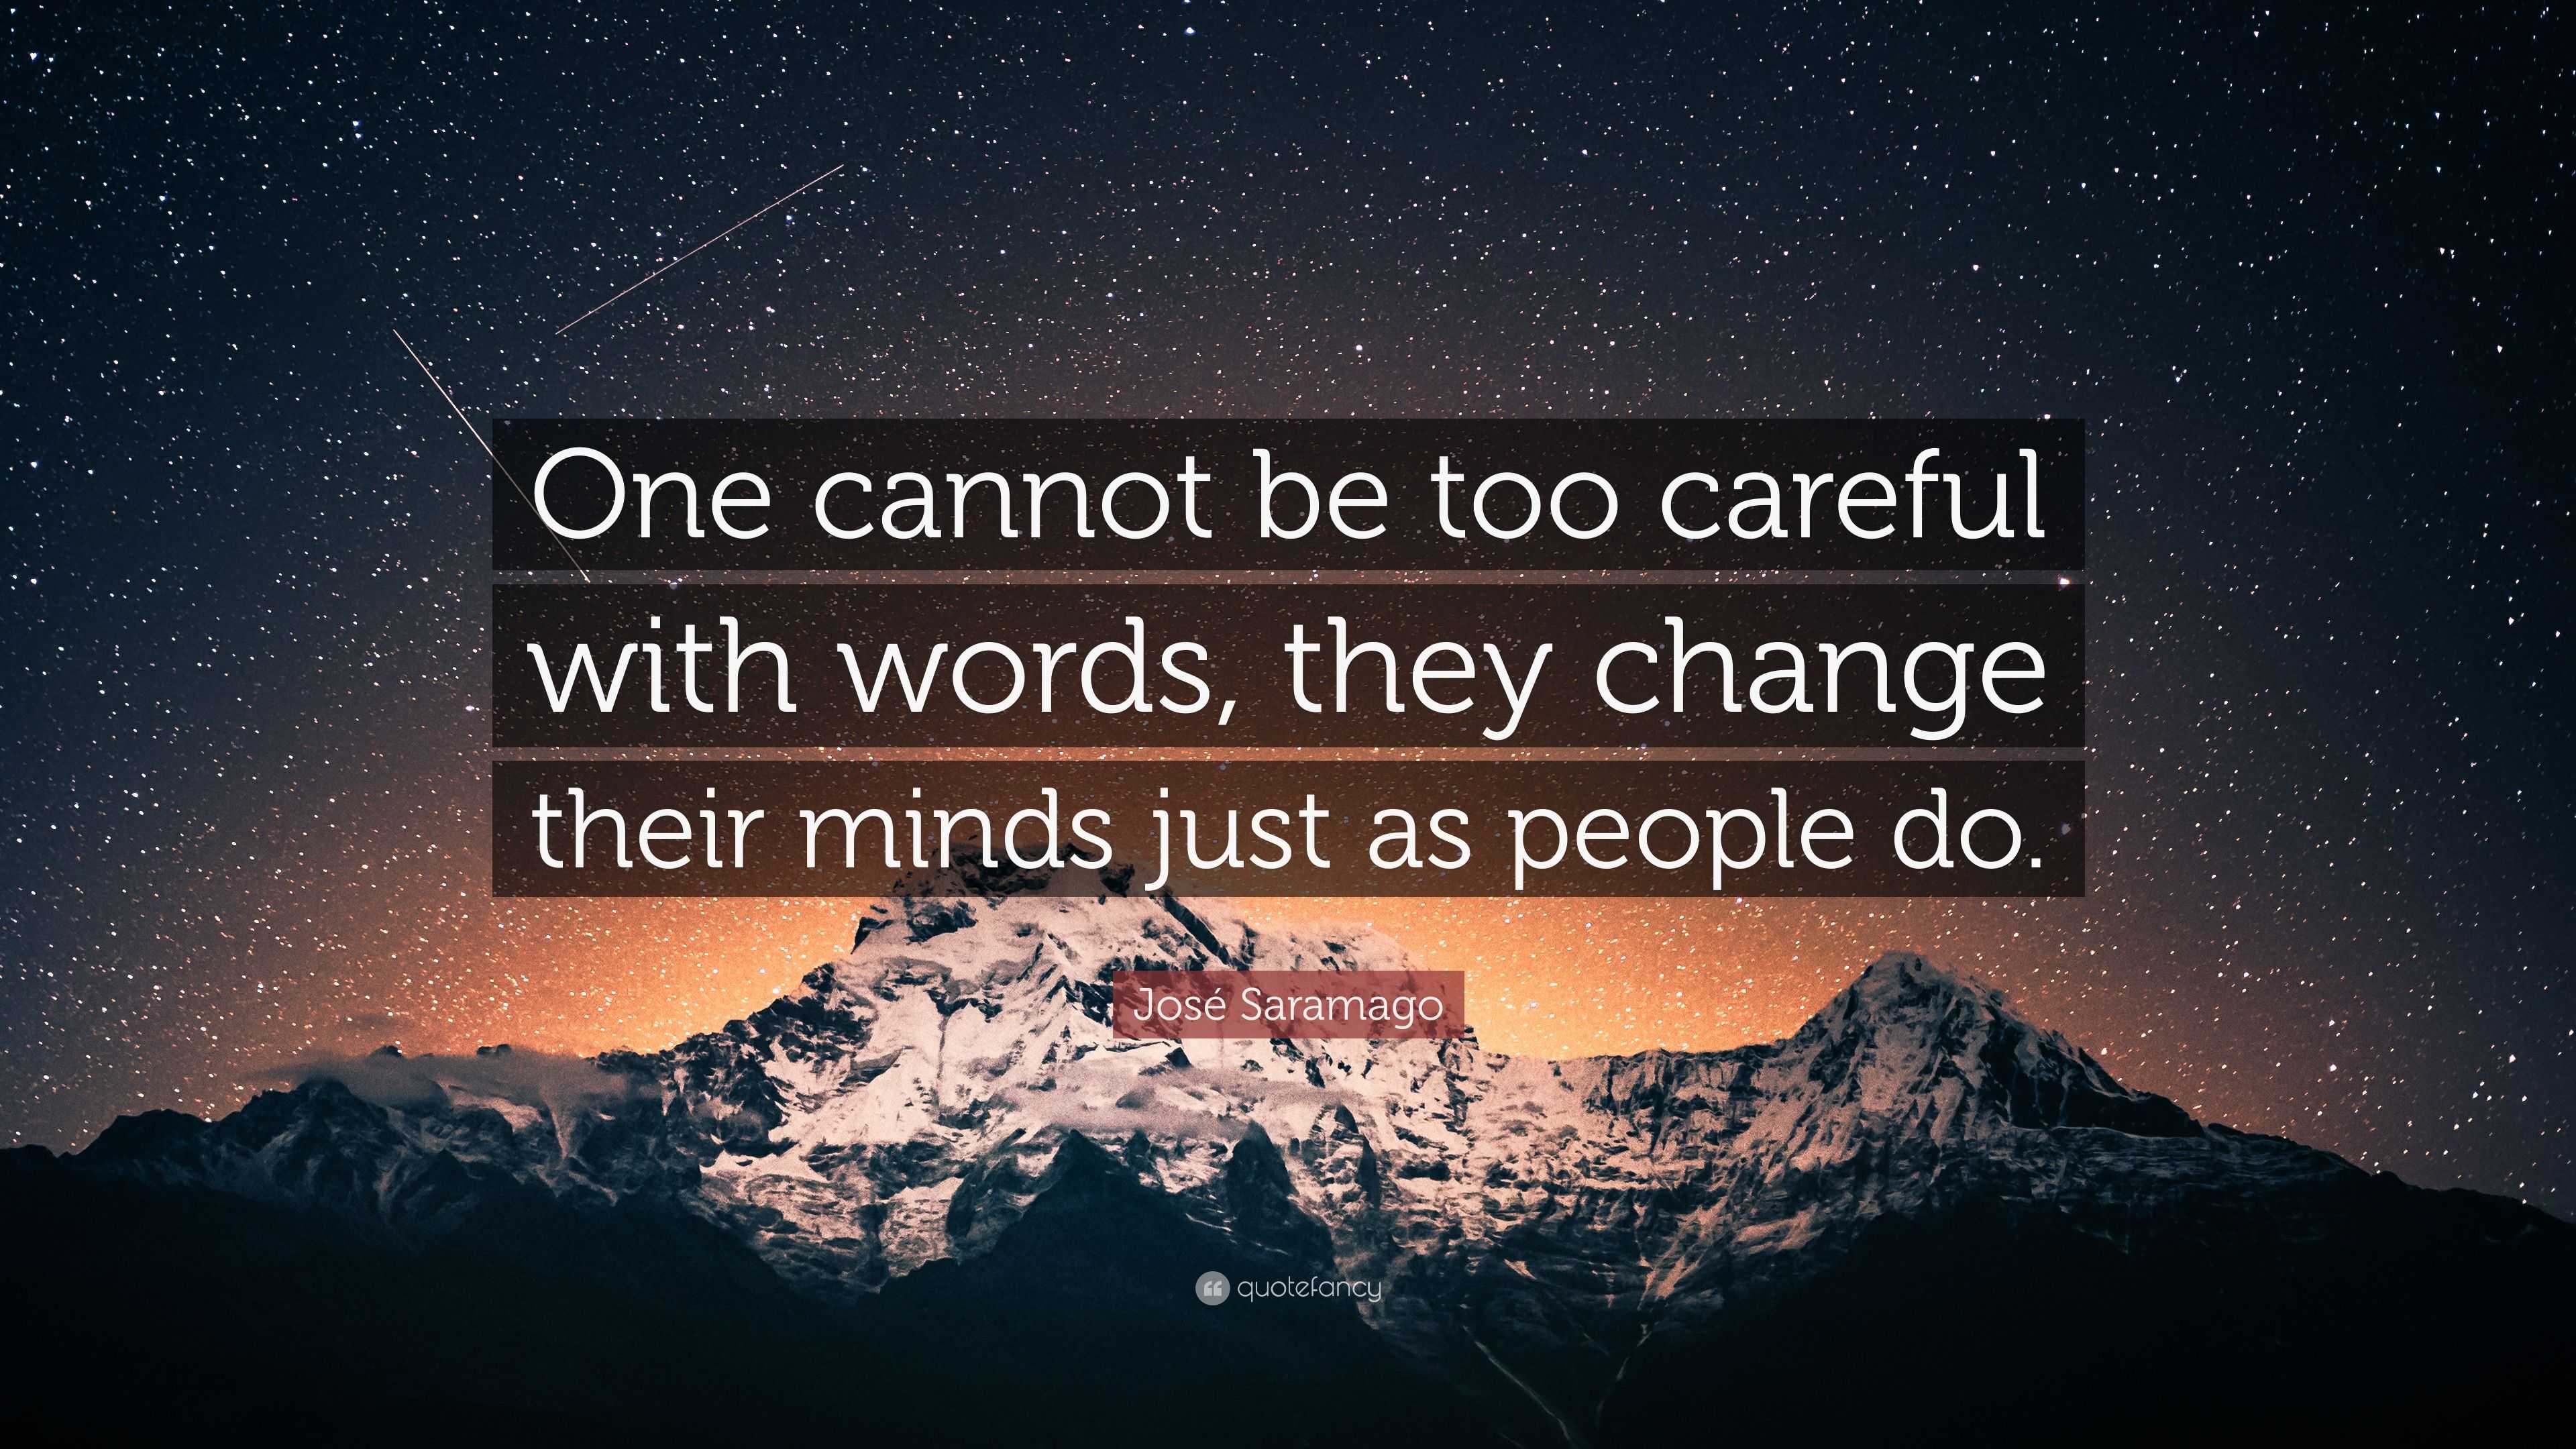 José Saramago Quote: “One cannot be too careful with words, they change ...